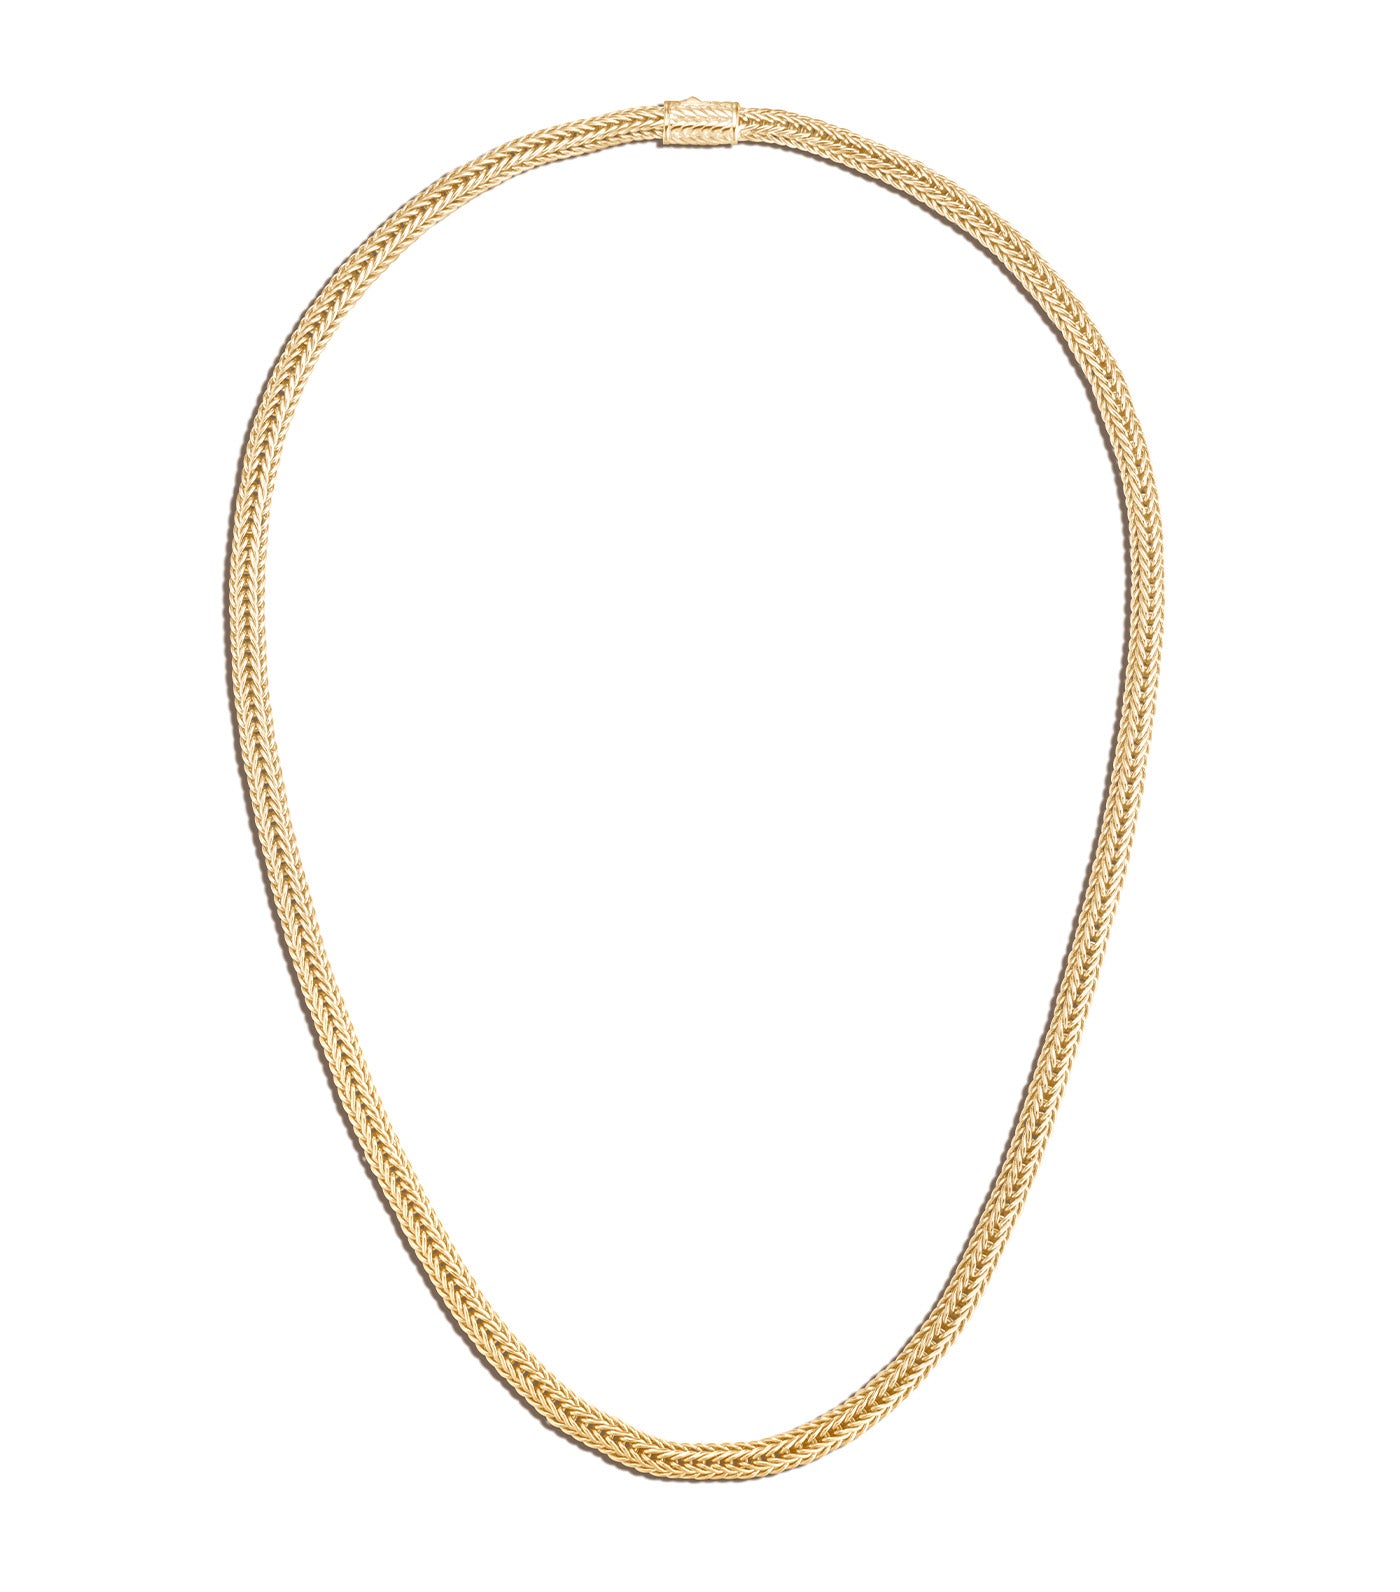 Kami Classic Chain 4.5mm Necklace 14k Yellow Gold